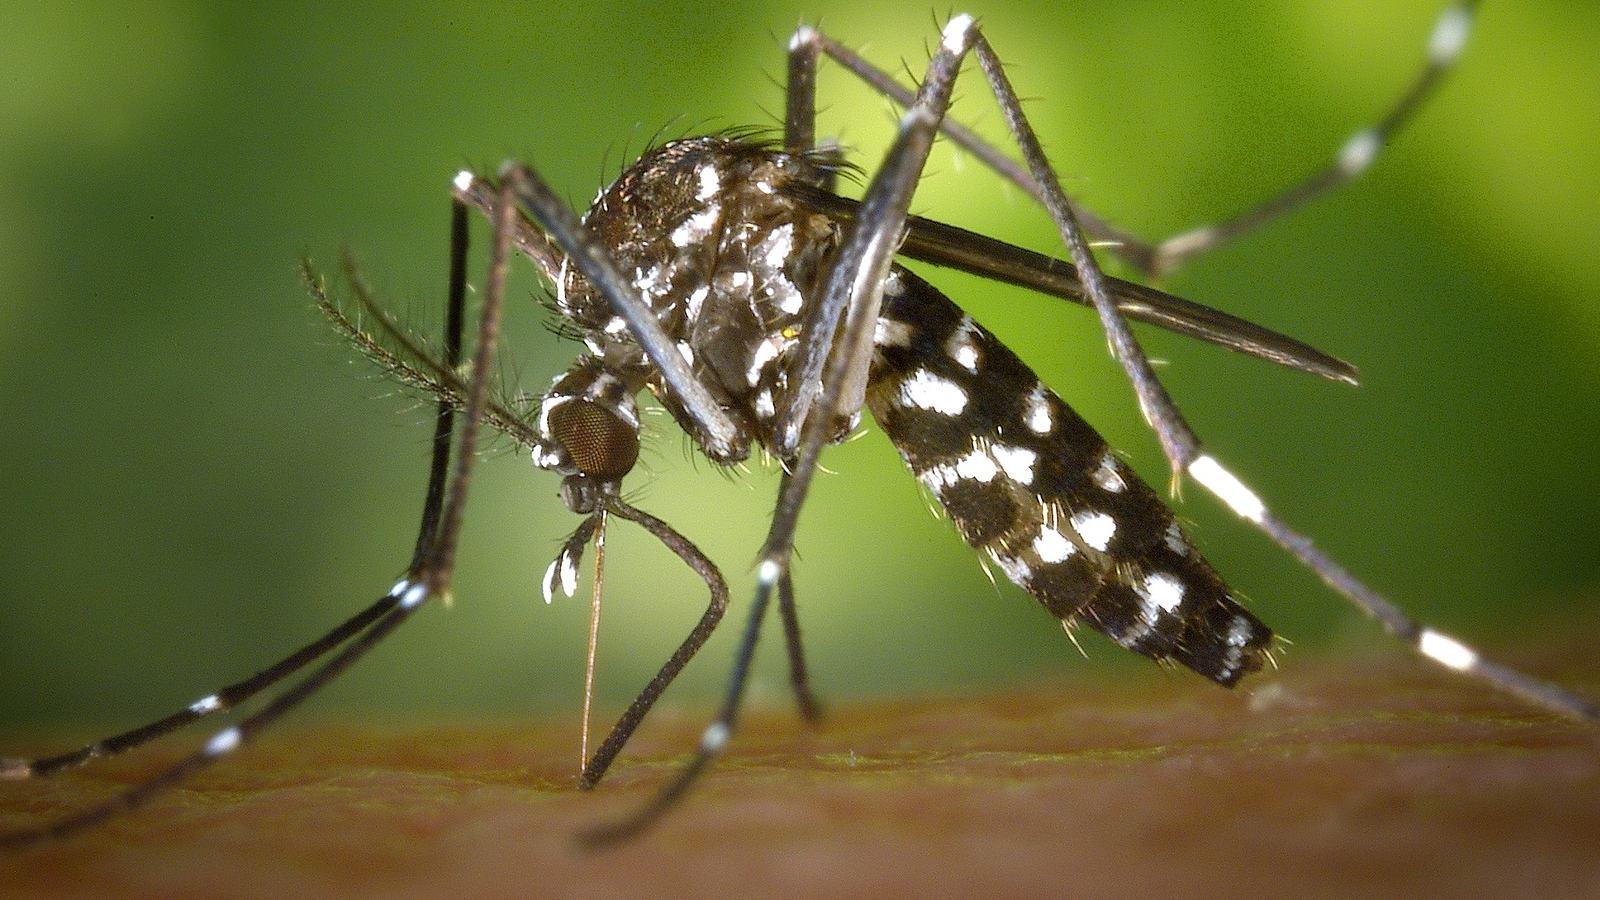 Moselle is colonized by the tiger mosquito